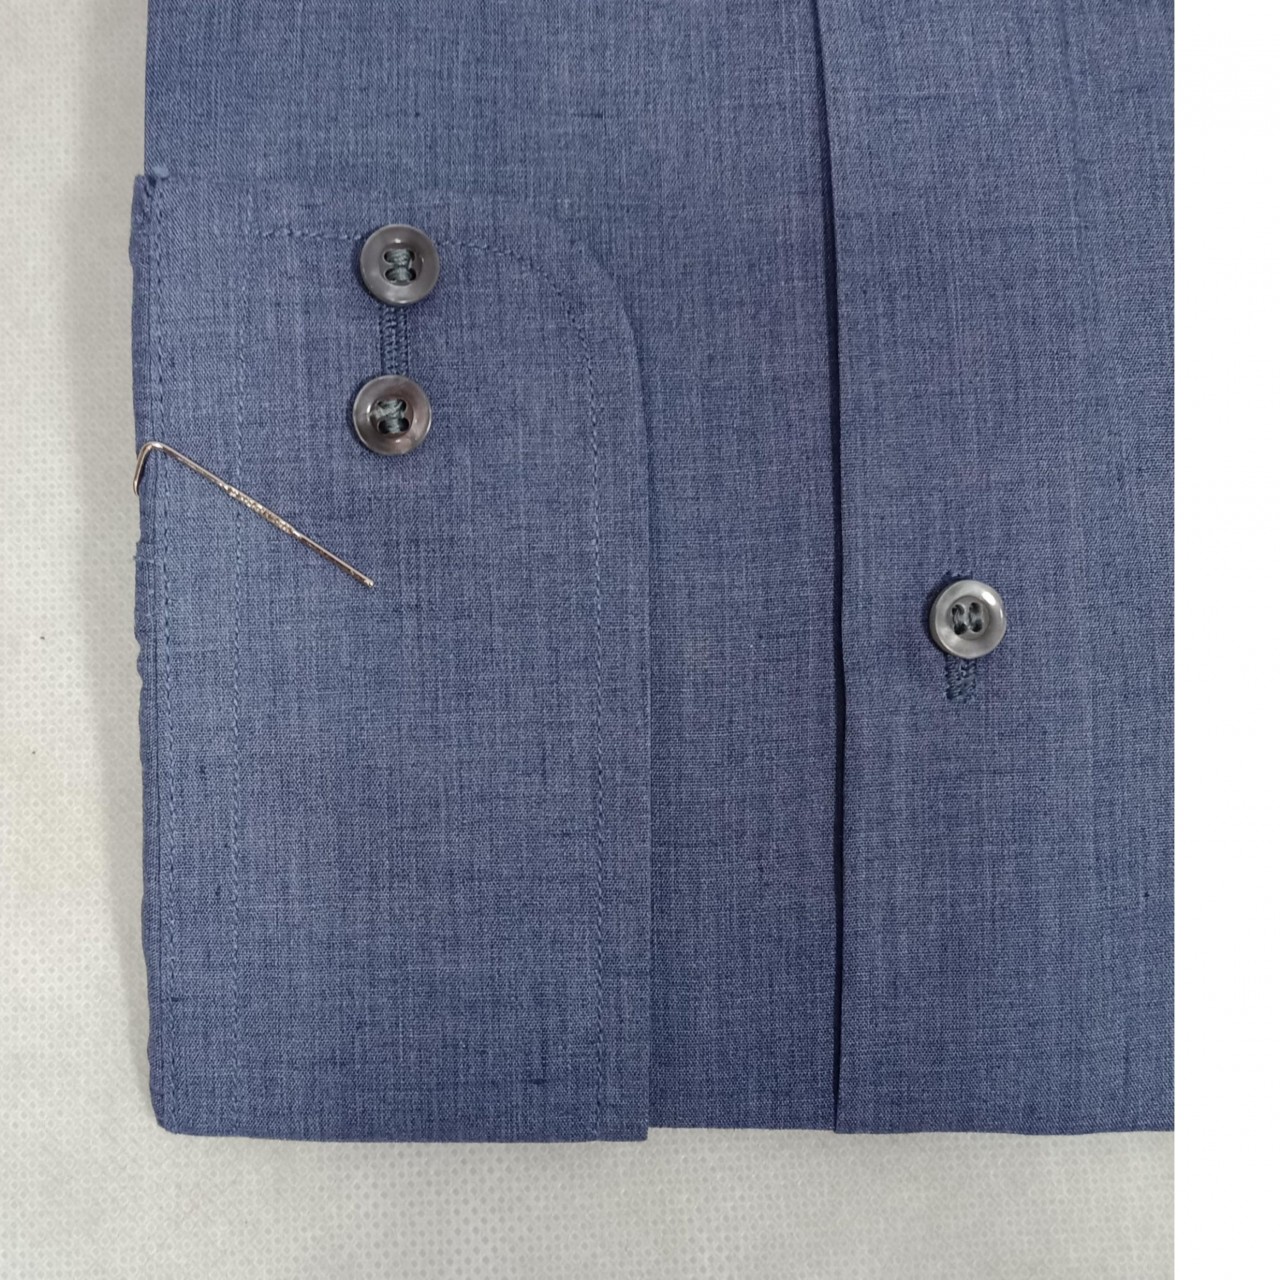 Chambray Formal Shirt For Men - Double Needle Stitching - Light Blue